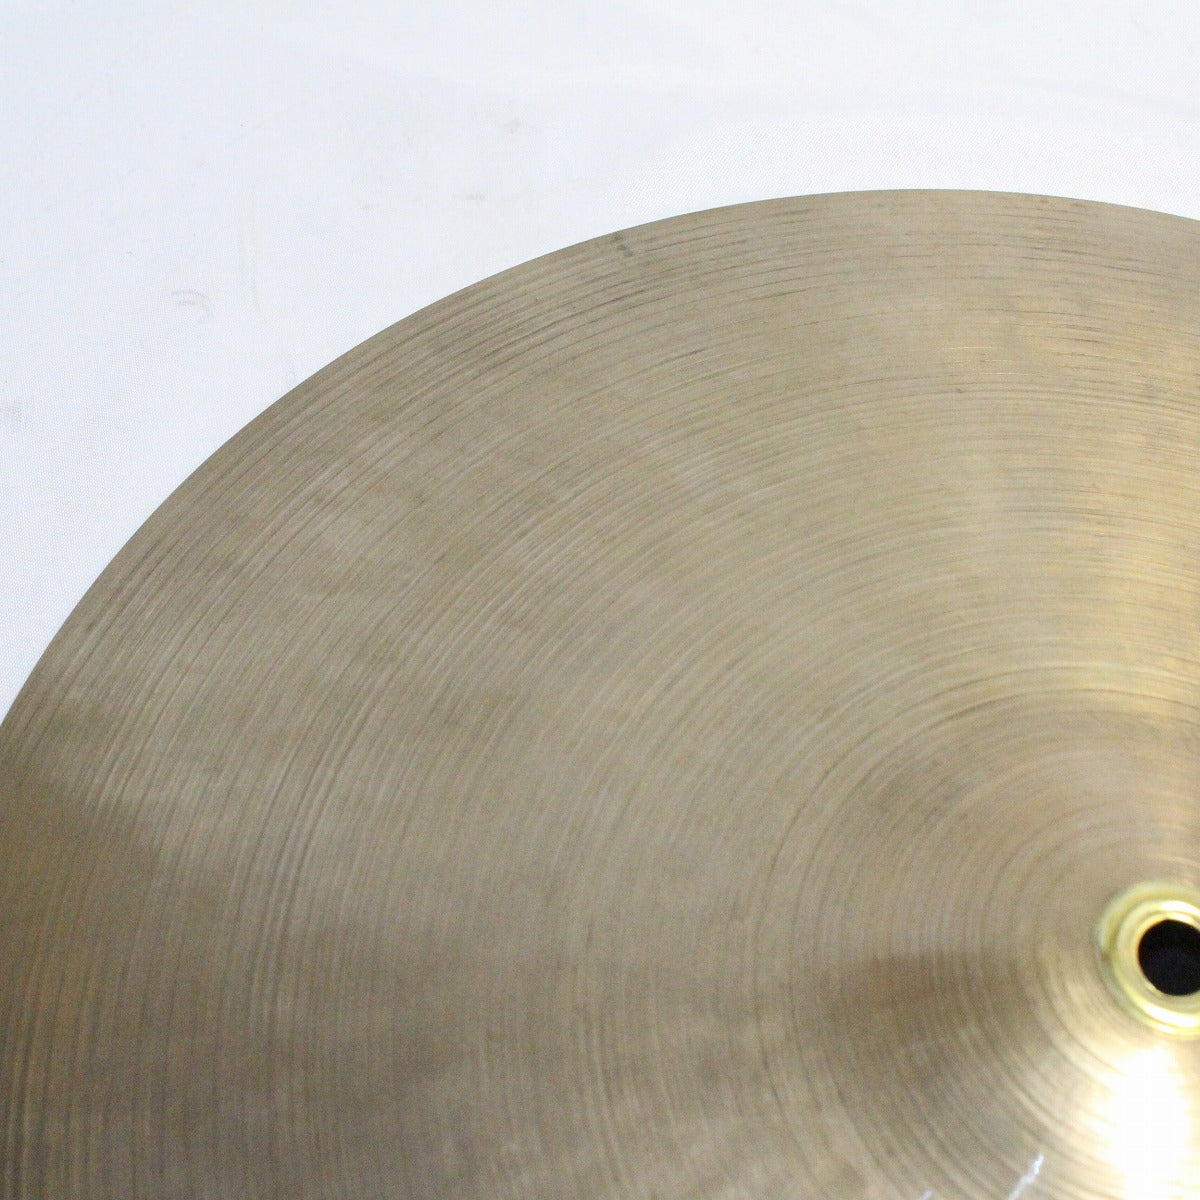 USED ZILDJIAN / Istanbul K New Stamp 18" RIDE 2232g with center dovetail Old K [08]